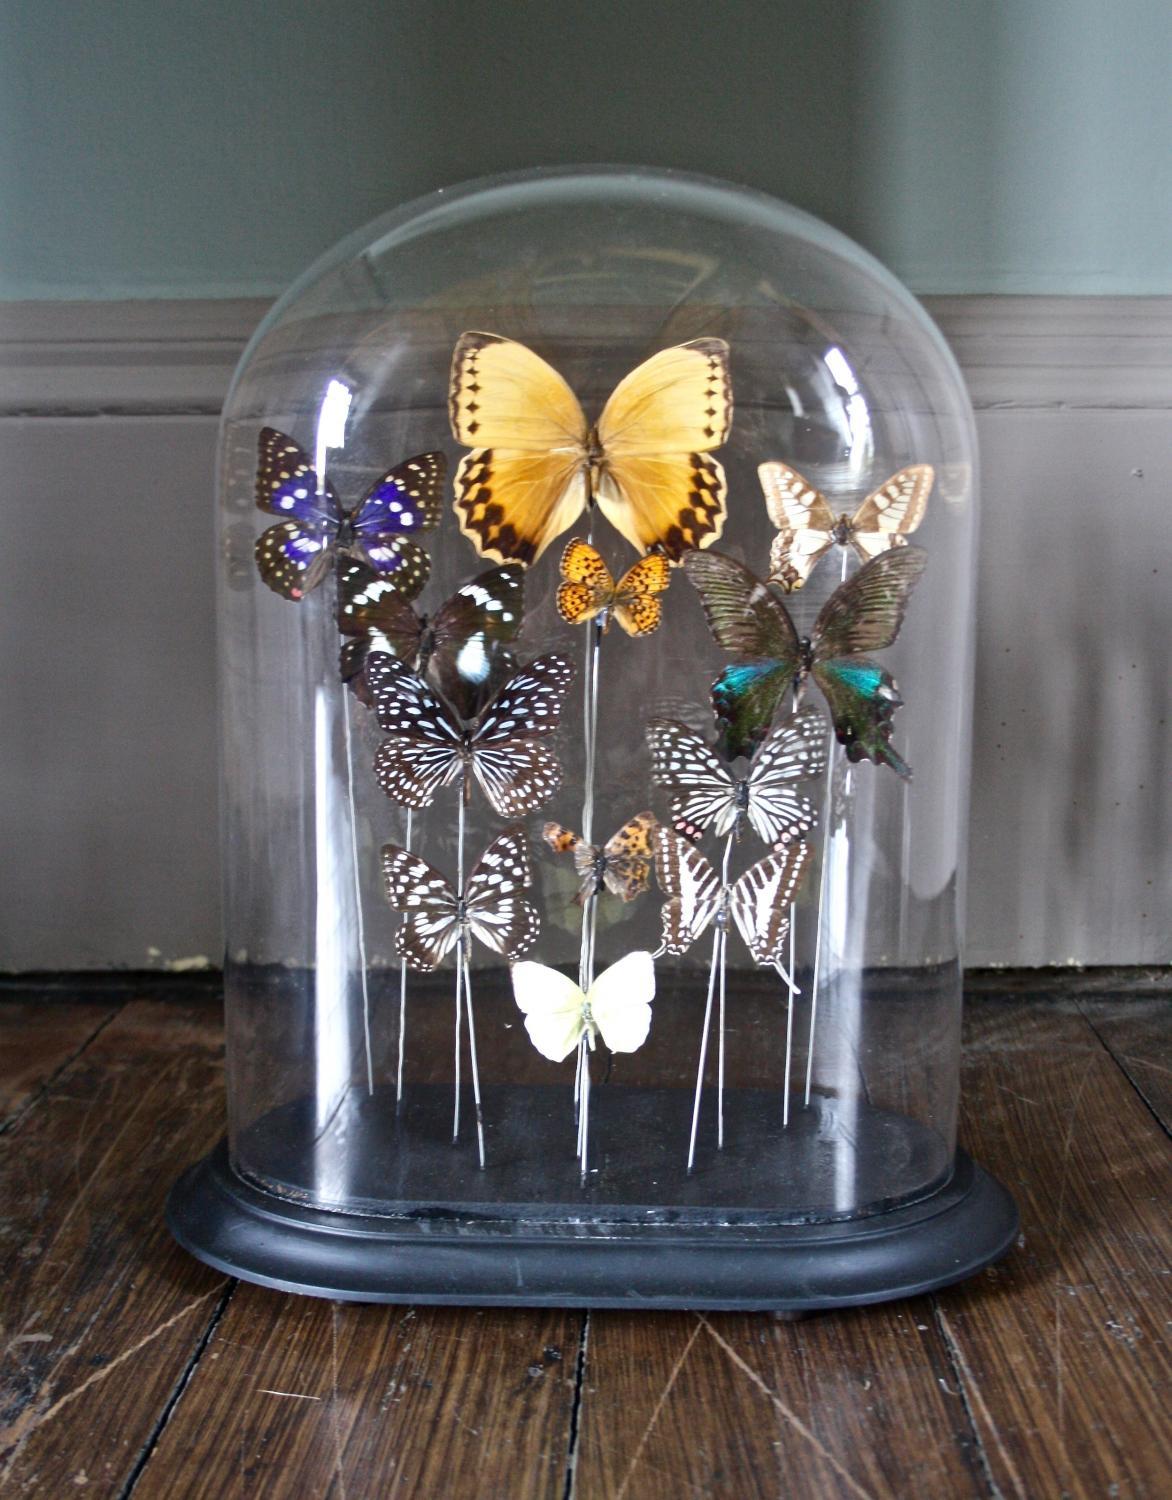 Glass dome on stand with butterflies